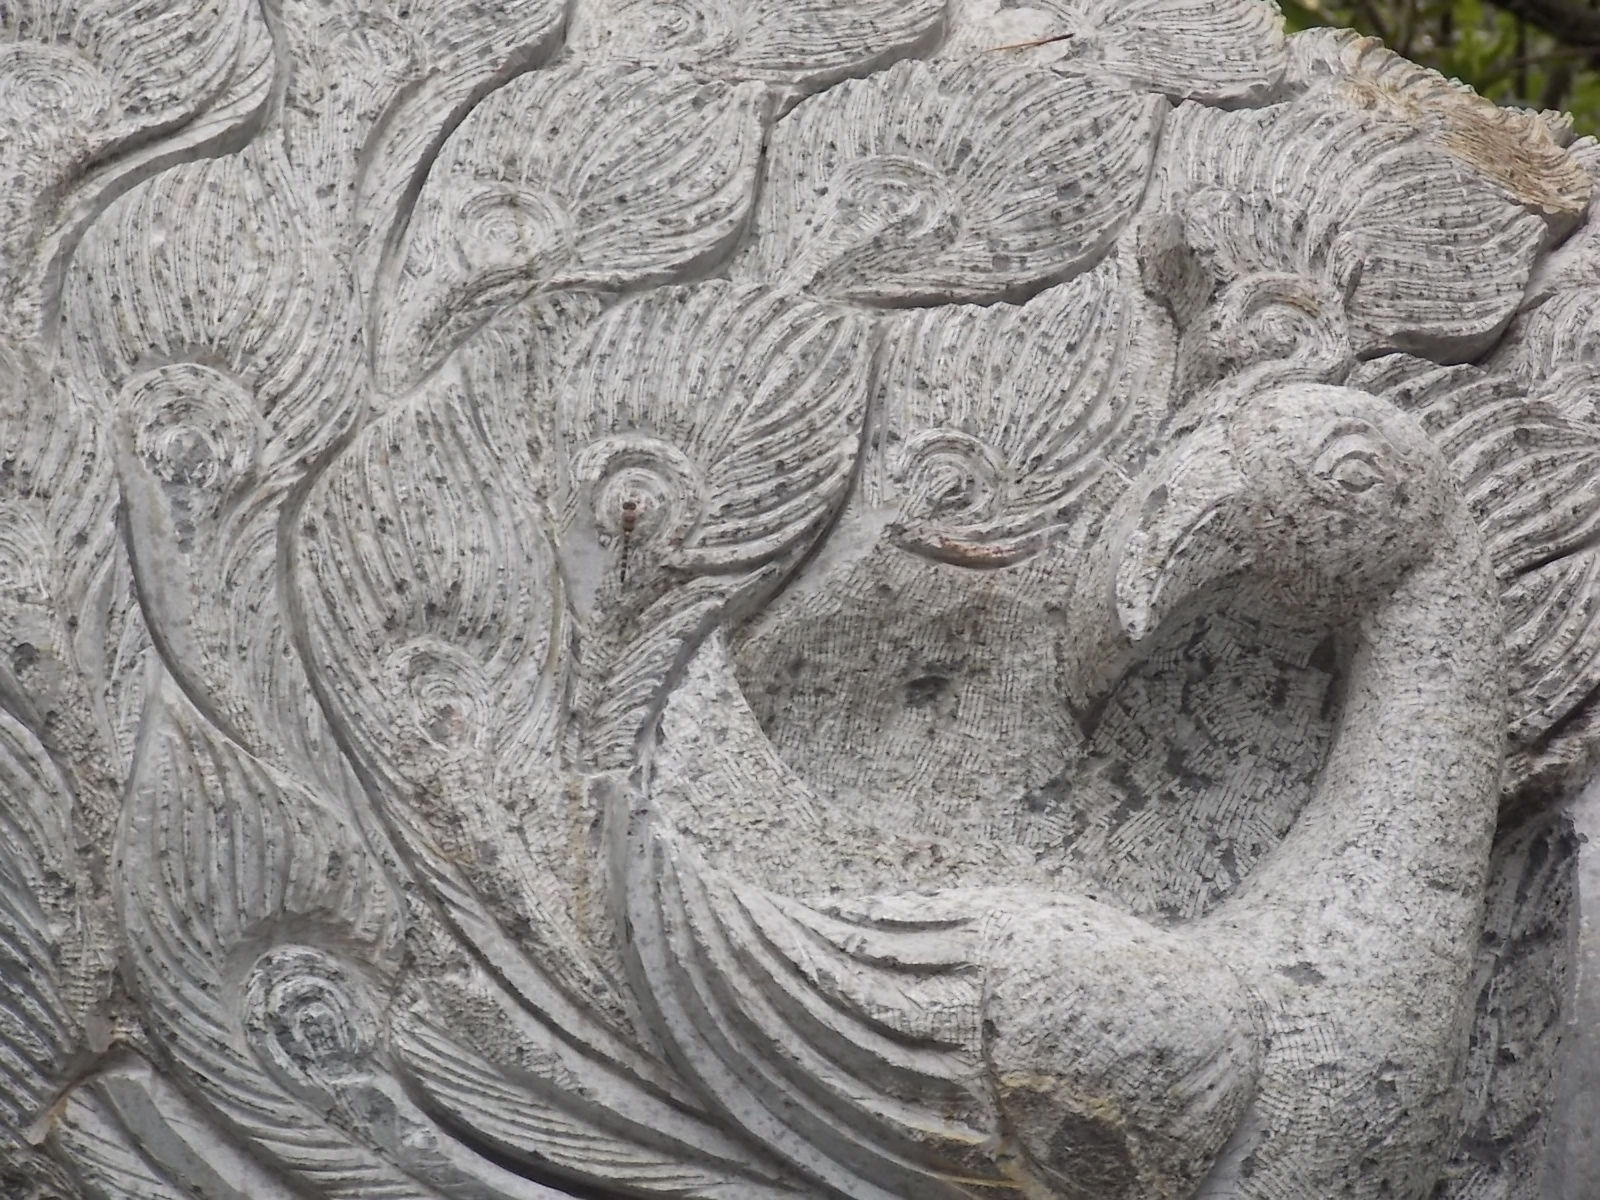 Peacock design - Carved on stone